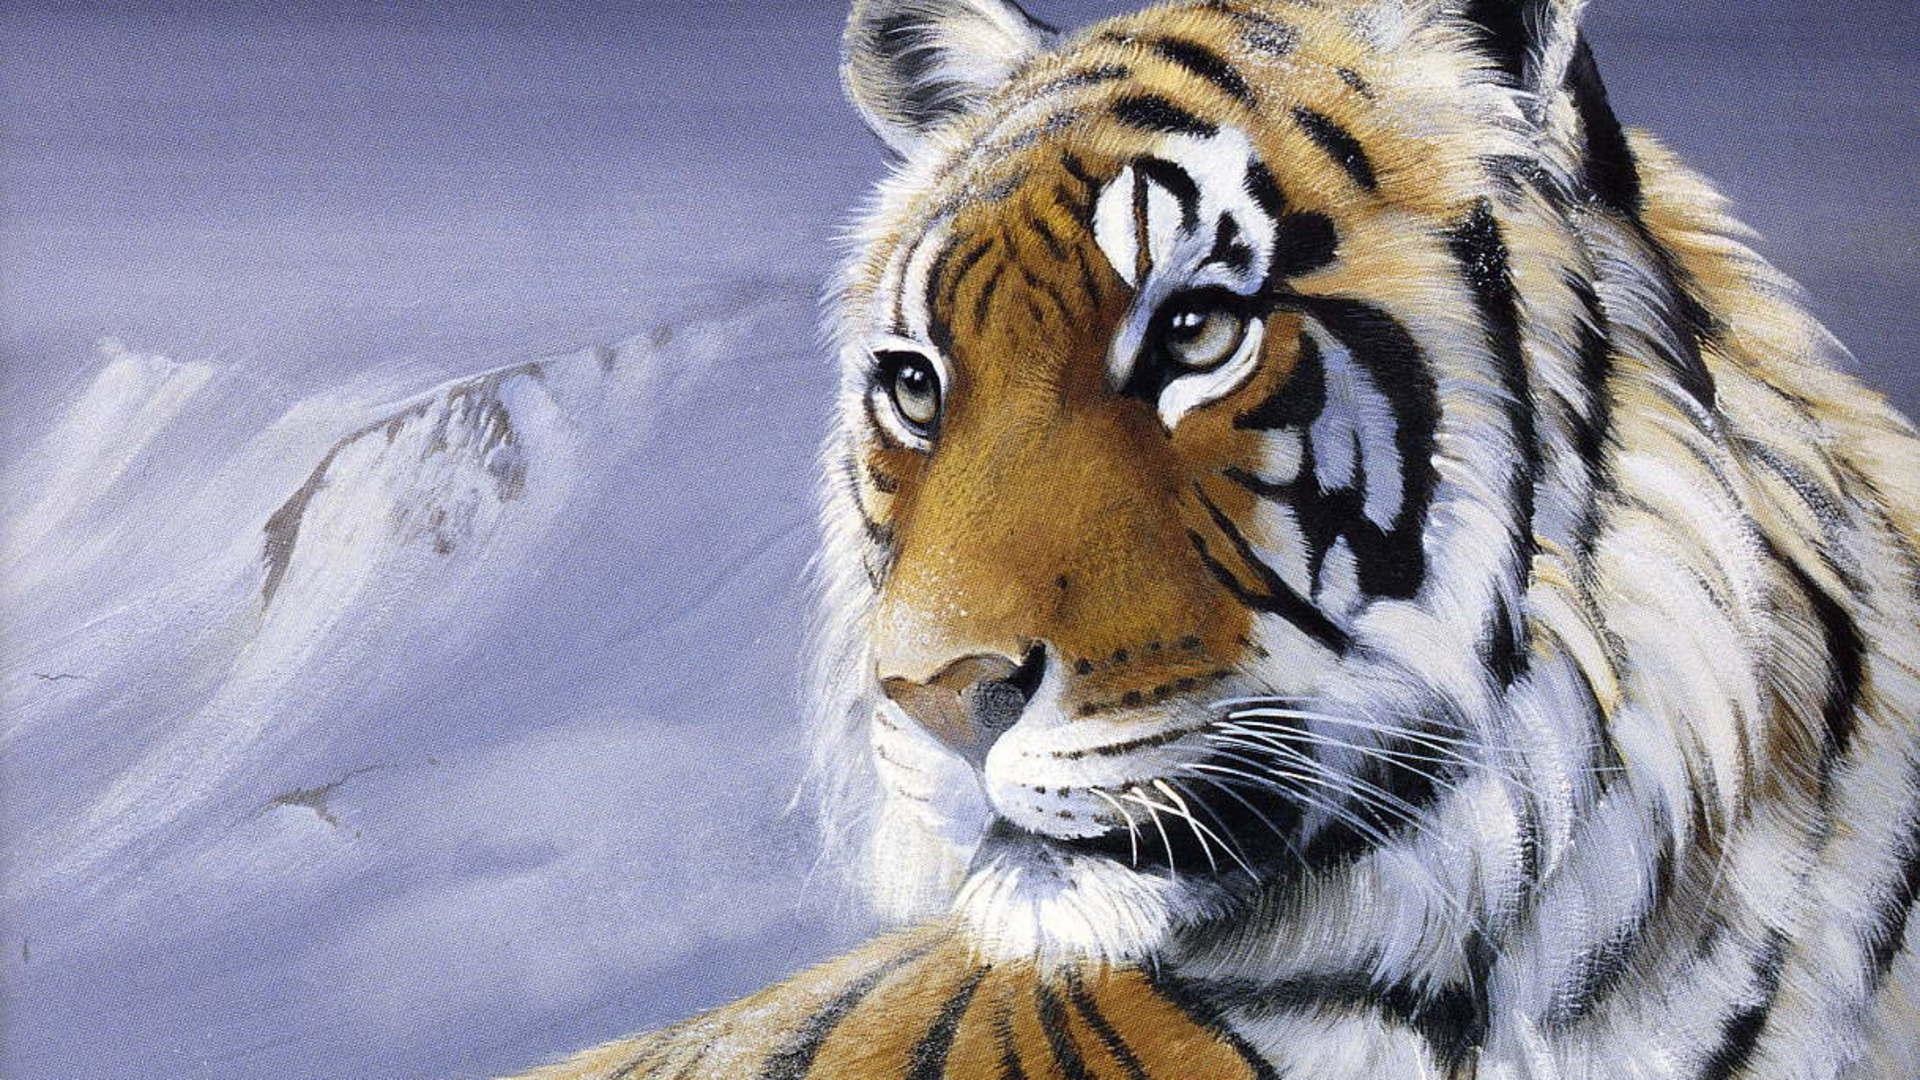 1920x1080 Wild Tiger Wallpapers Download - HD Great Images